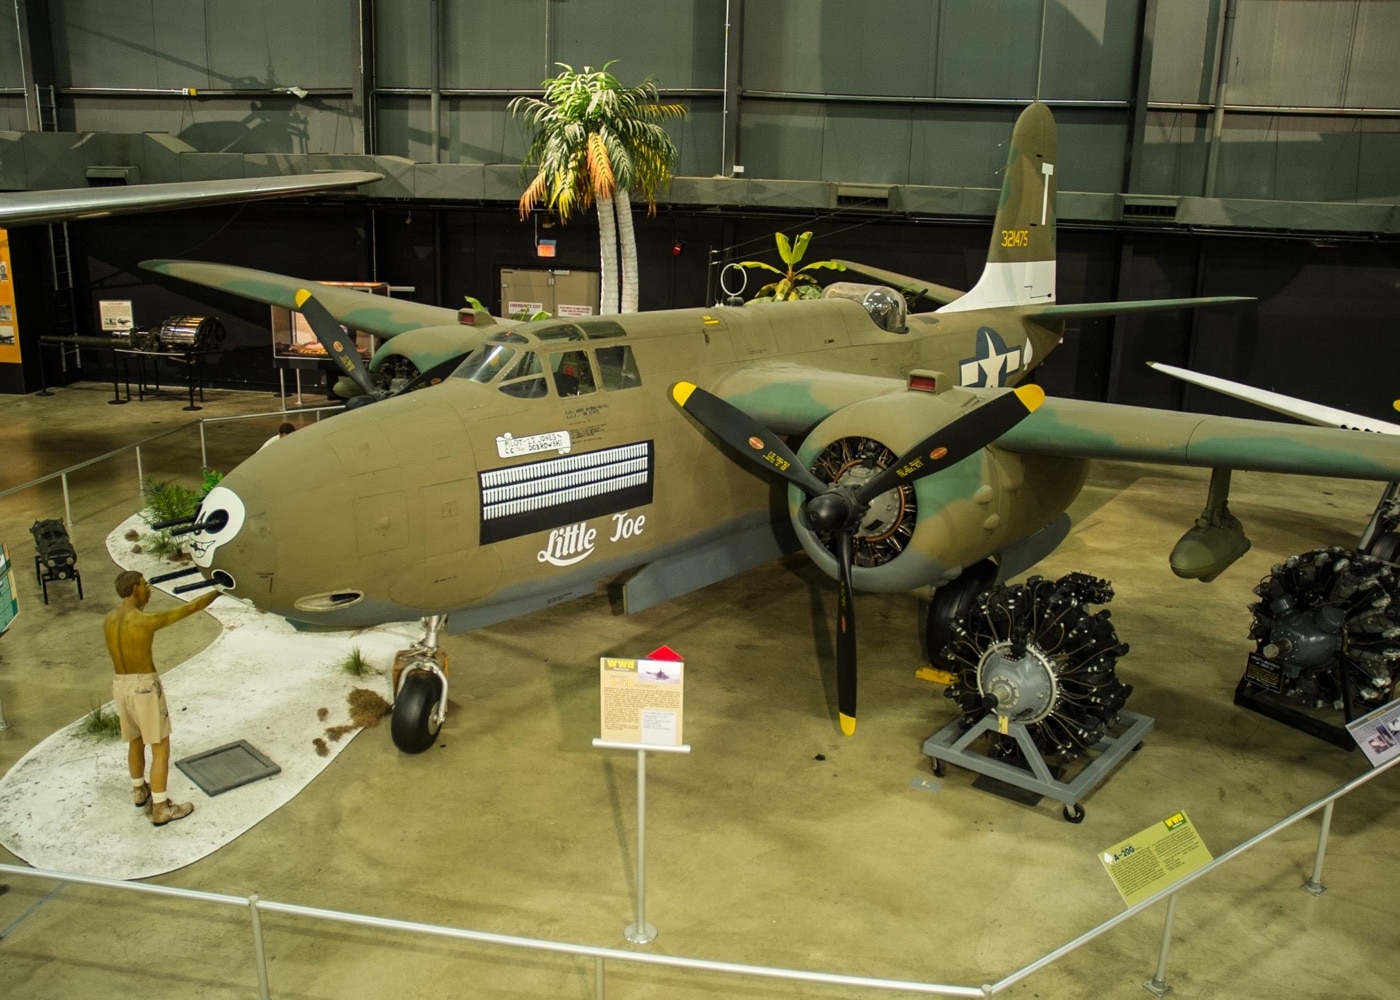 Shown is a restored A-20 in a full size diorama at the National Museum of the US Air Force. Little Joe A-20 in USAF Museum